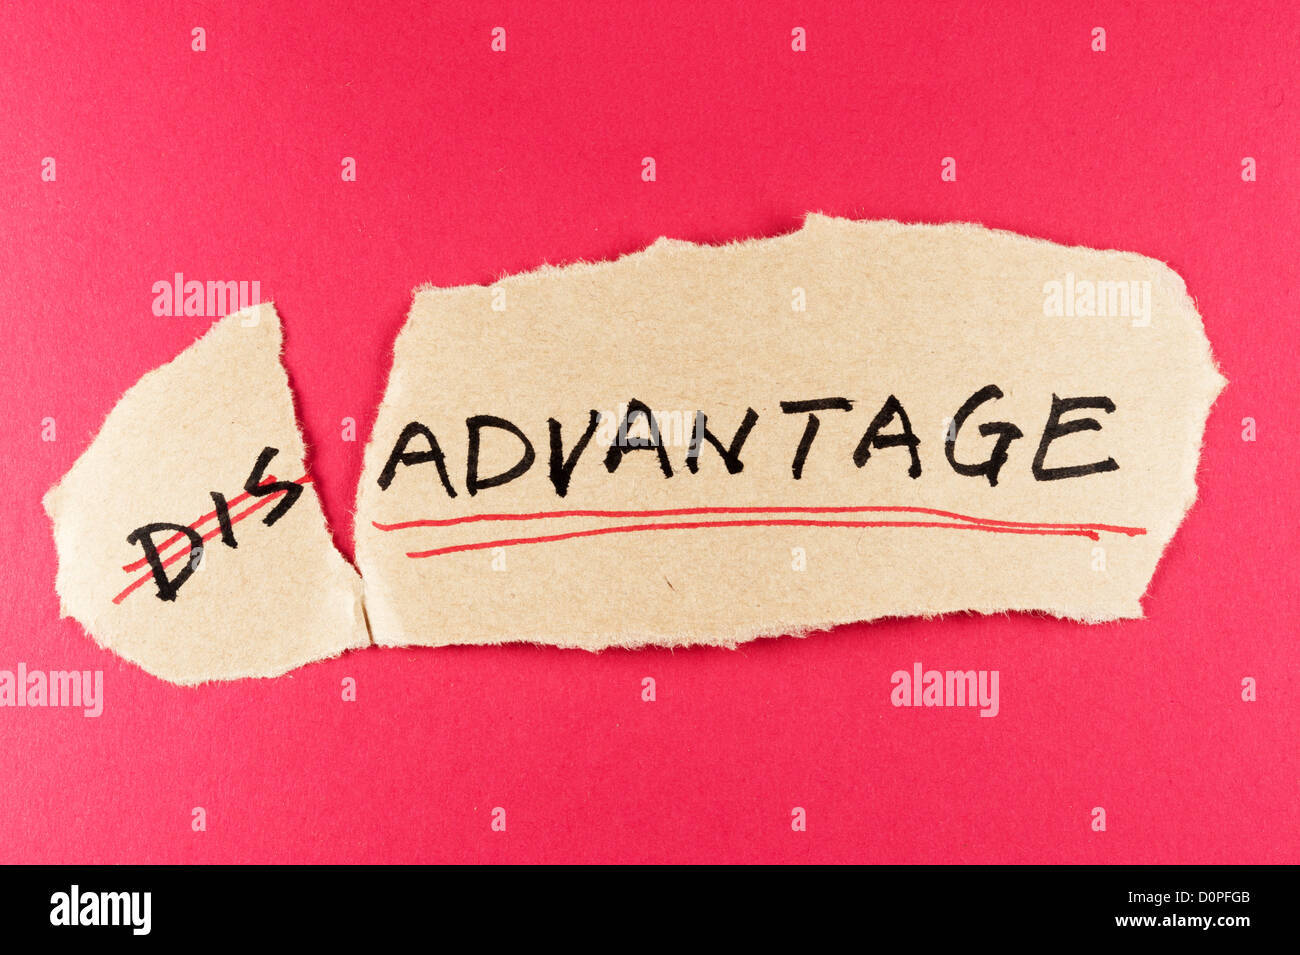 amending disadvantage word and changing it to advantage Stock Photo